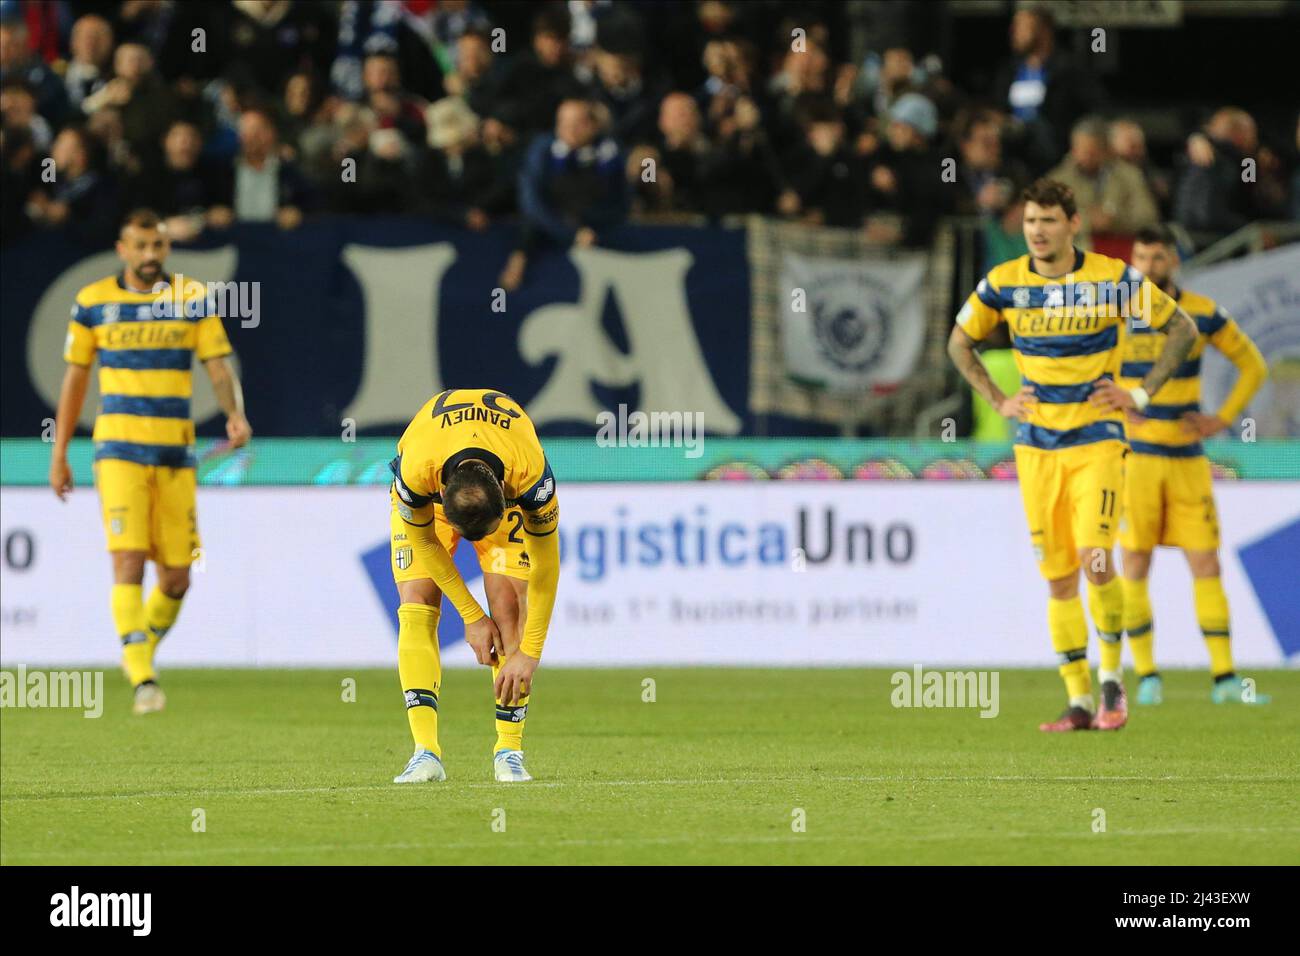 Brescia, Italy. 11th Apr, 2022. Players of PARMA CALCIO react during the Serie B match between Brescia Calcio and Parma Calcio at Stadio Mario Rigamonti on April 11, 2022 in Brescia, Italy. Credit: Independent Photo Agency/Alamy Live News Stock Photo